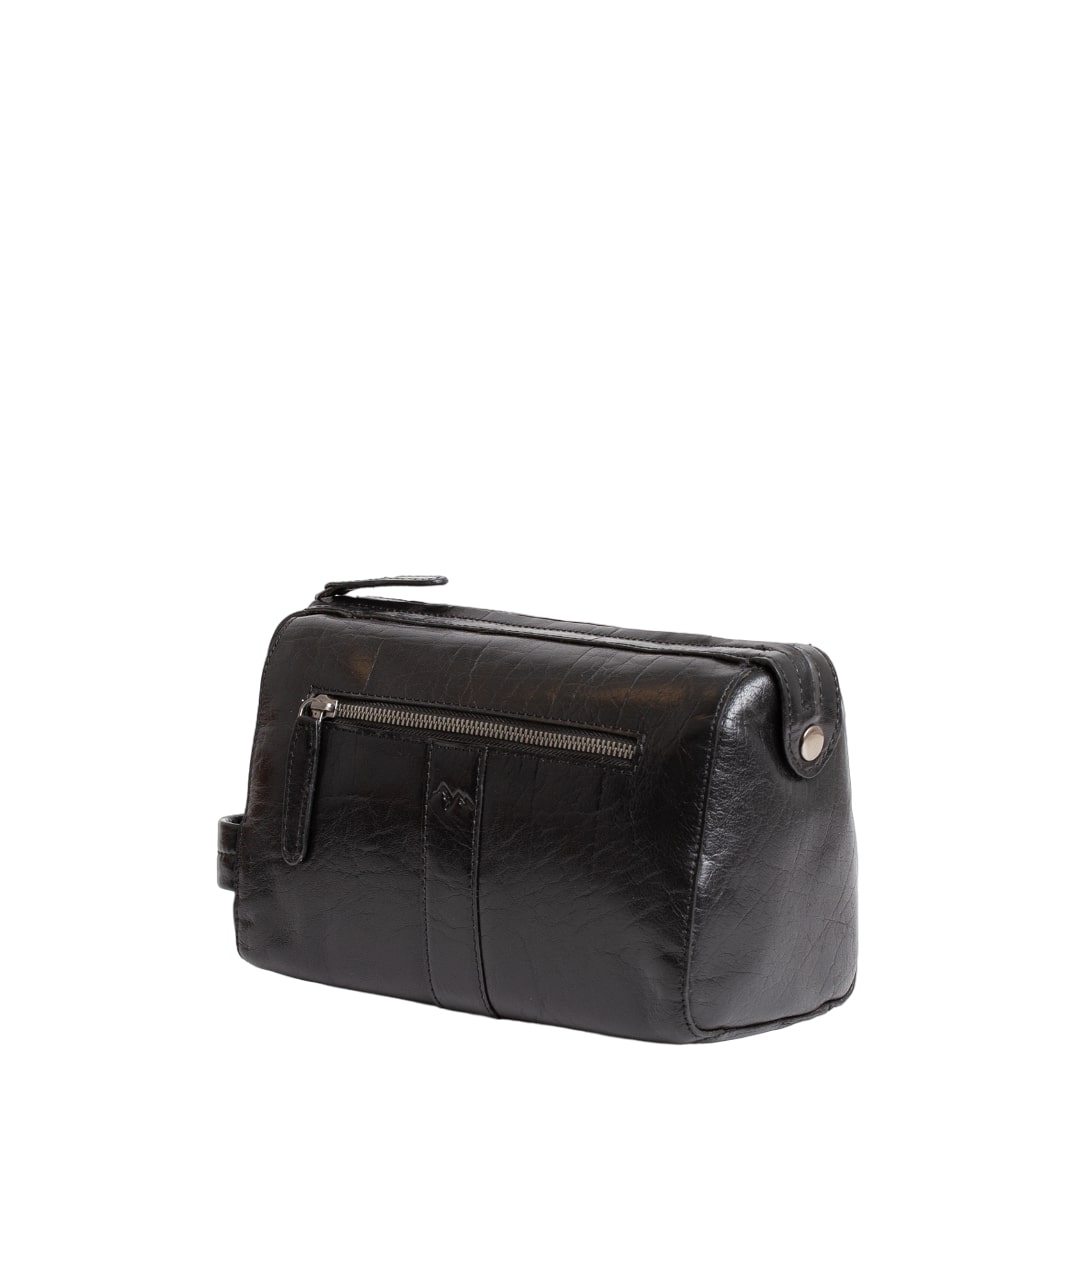 BHC Classic Leather Toiletbag Black